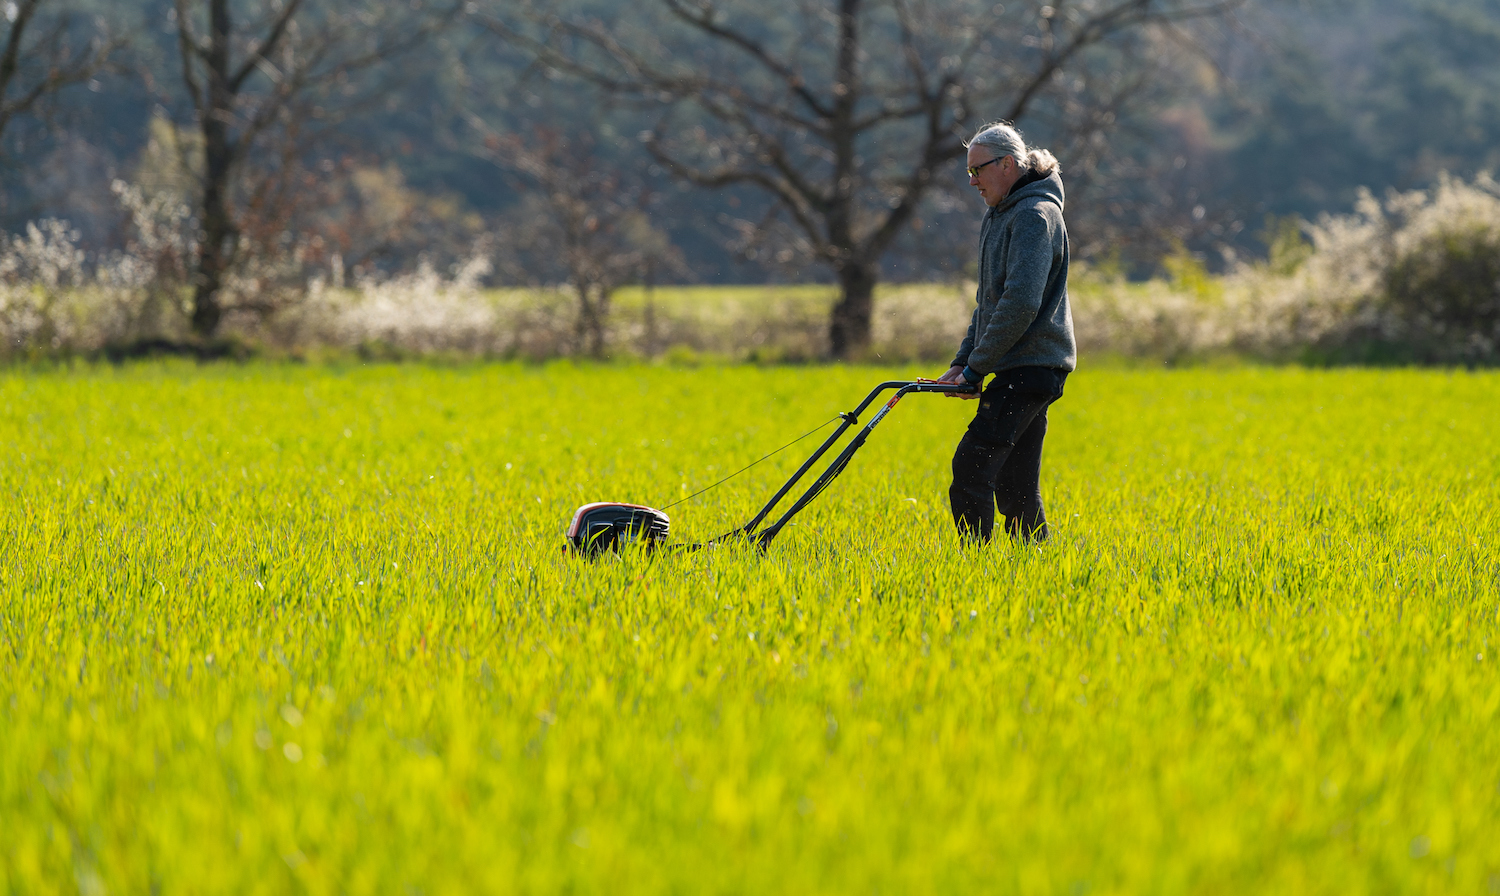 A person showing using a lawn mower for big yards